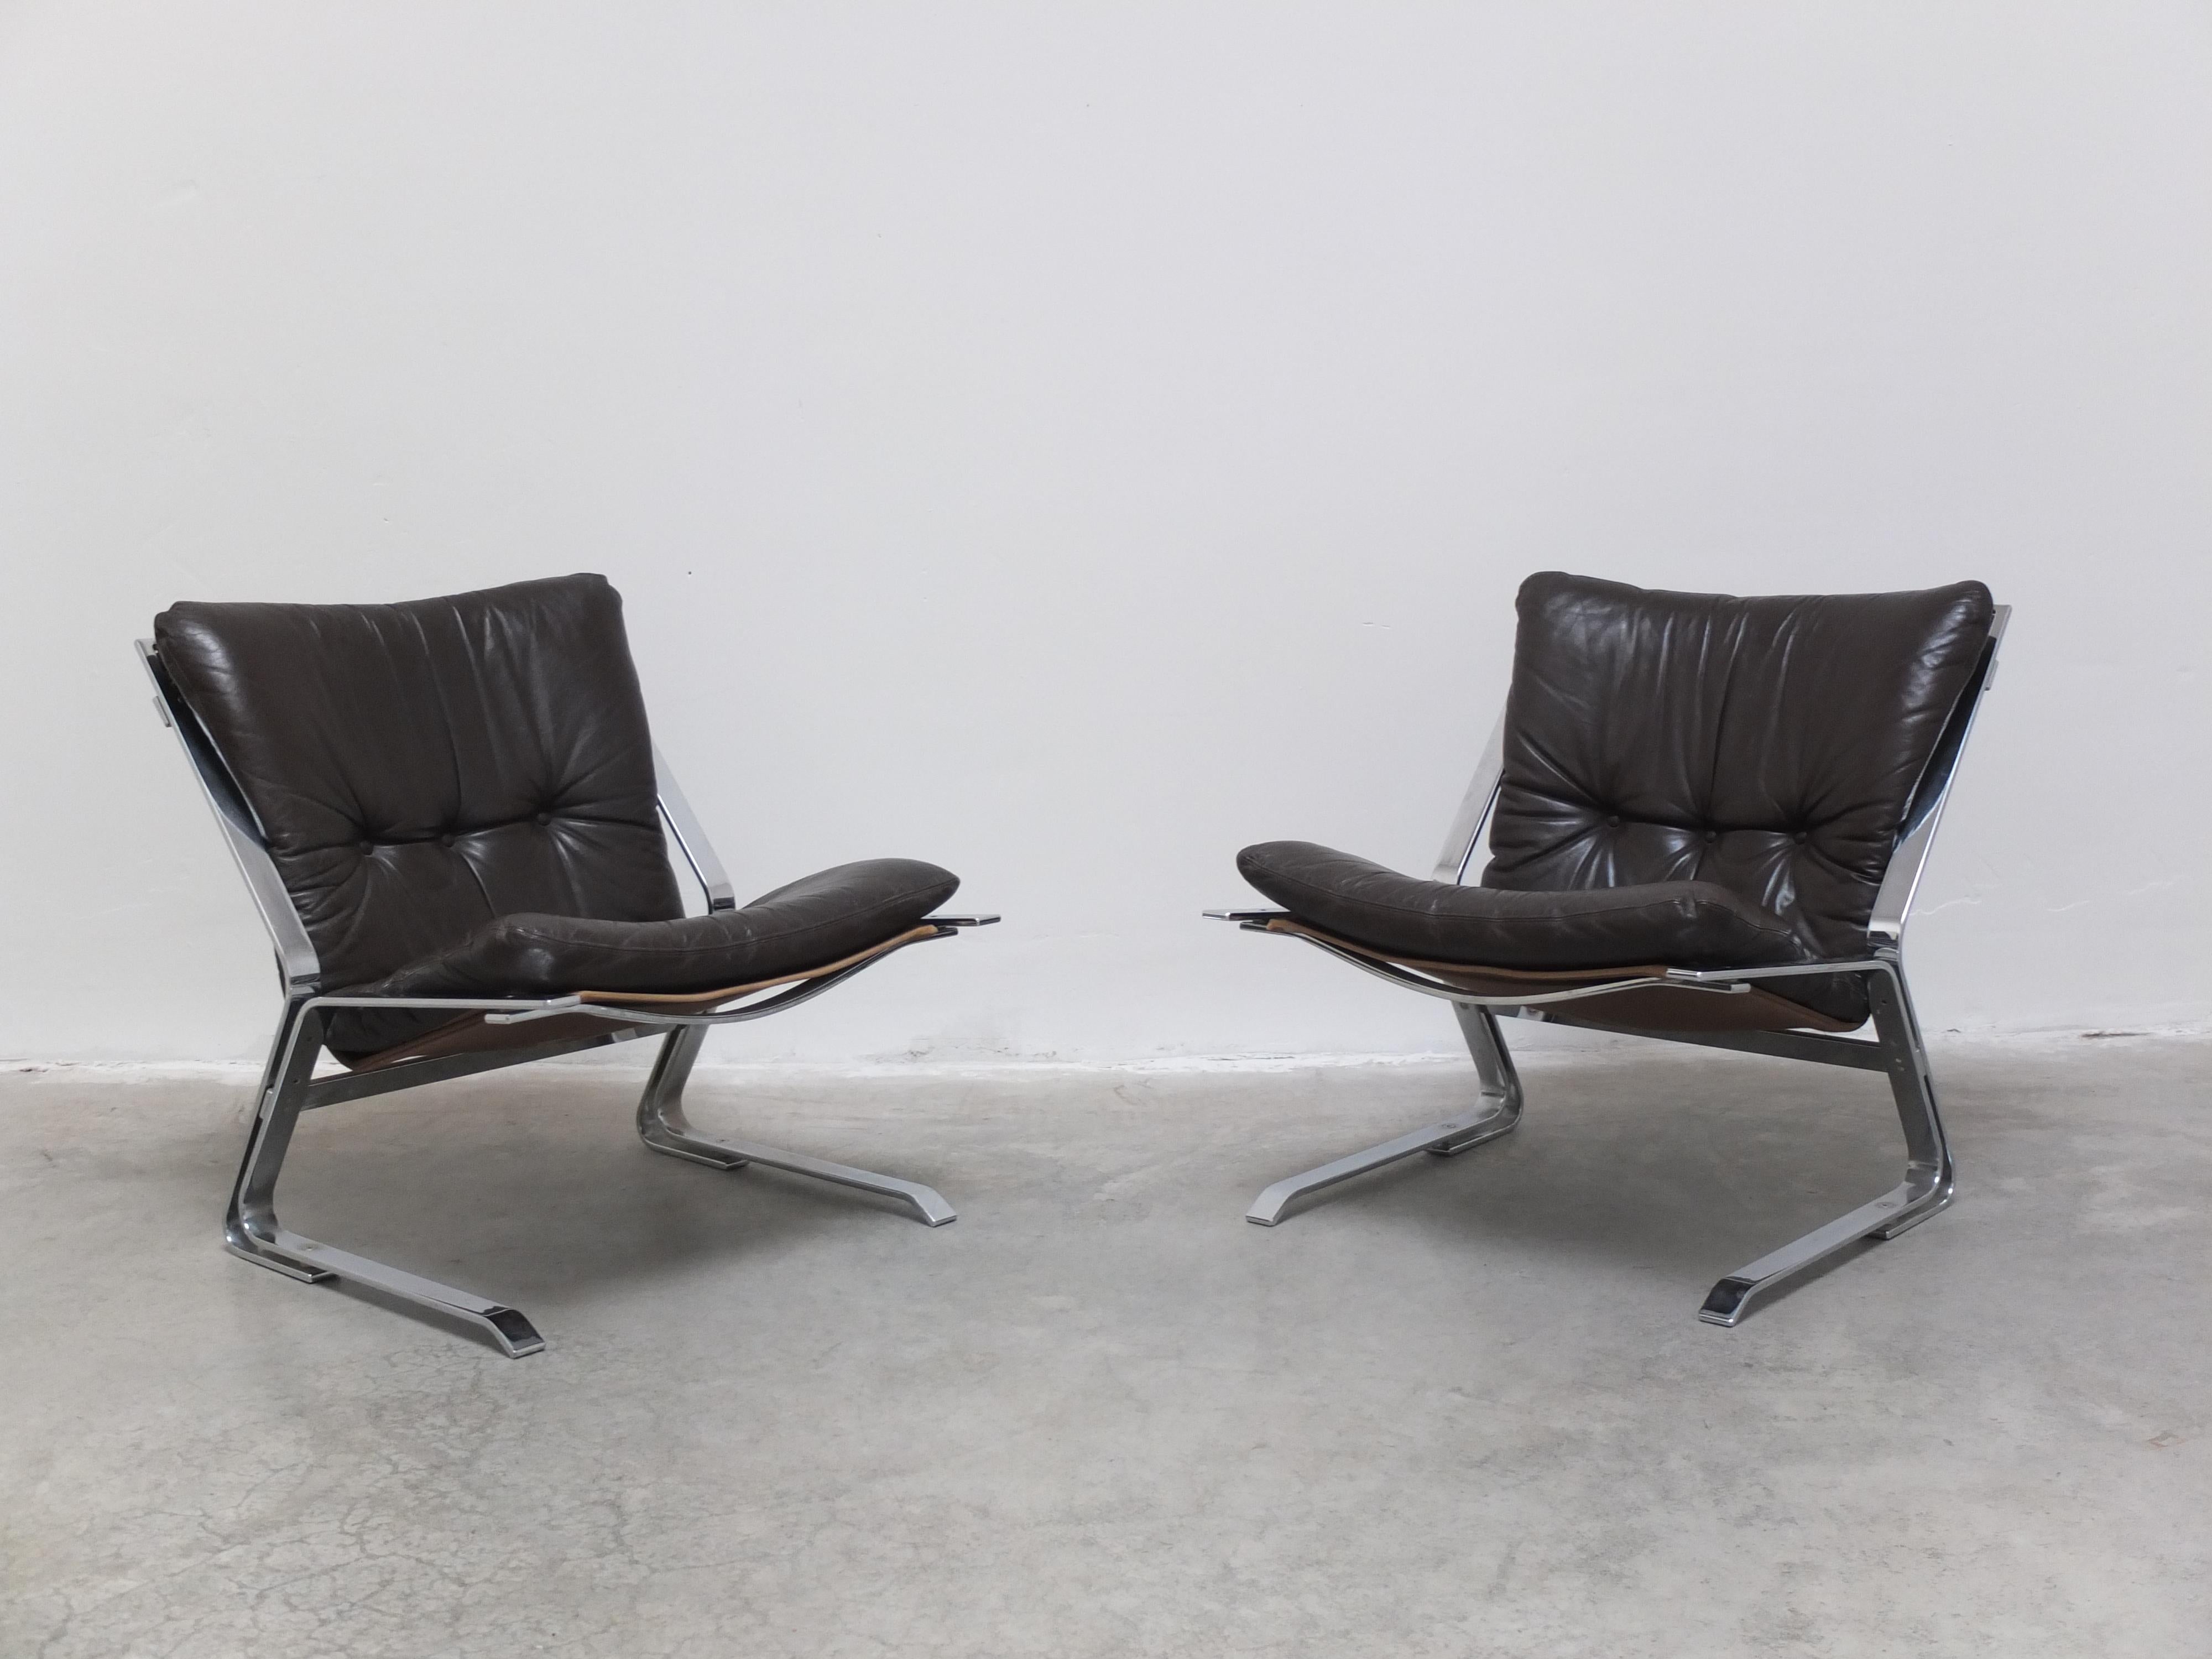 20th Century Rare Pair of 'Pirate' Lounge Chairs by Elsa & Nordahl Solheim for Rykken, 1960s For Sale